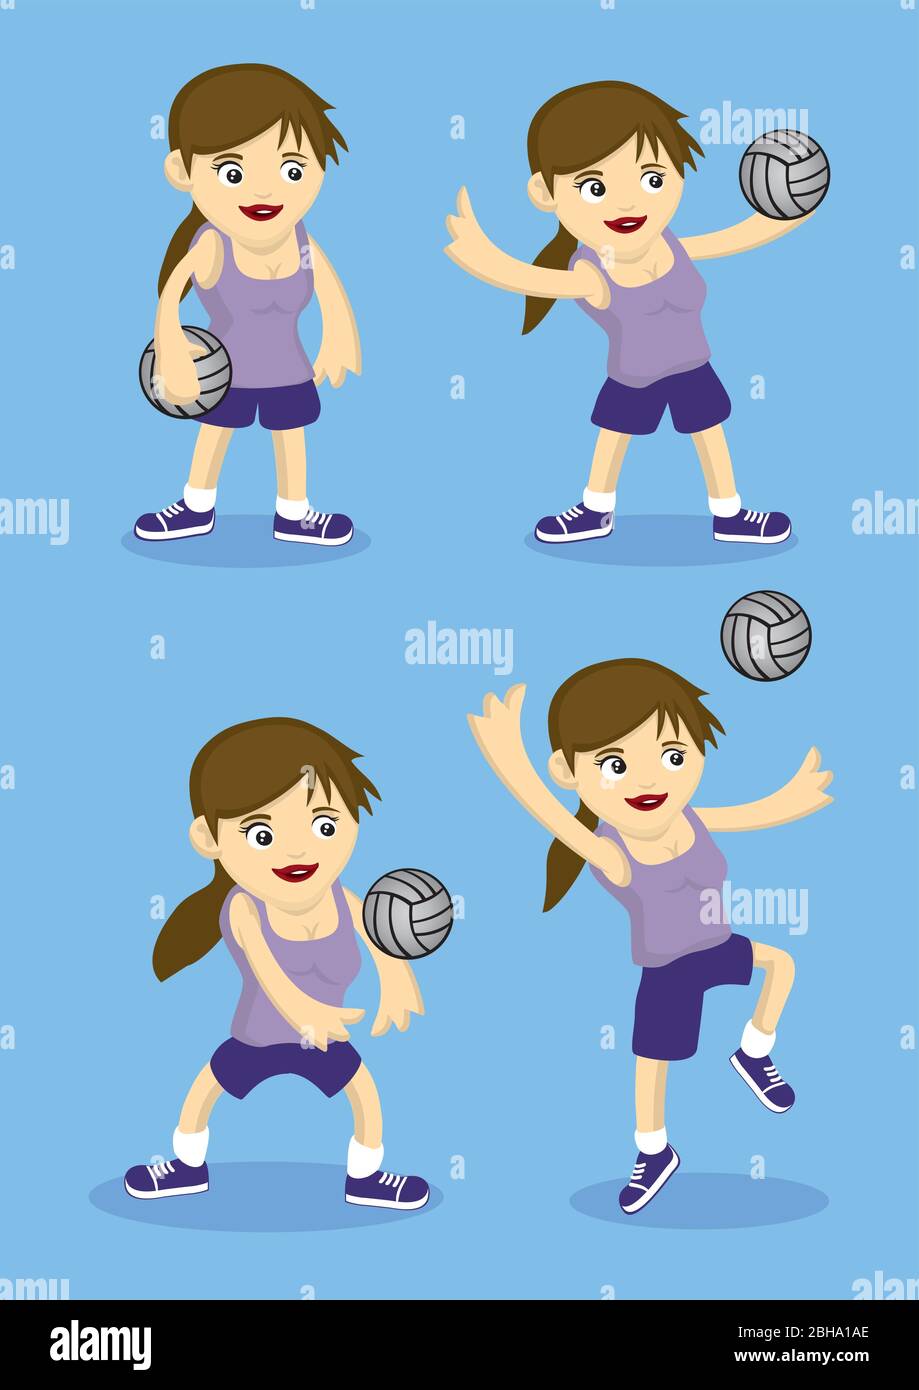 Set Of Cute Cartoon Children Or Kids, Girls And Boys, Play Sports